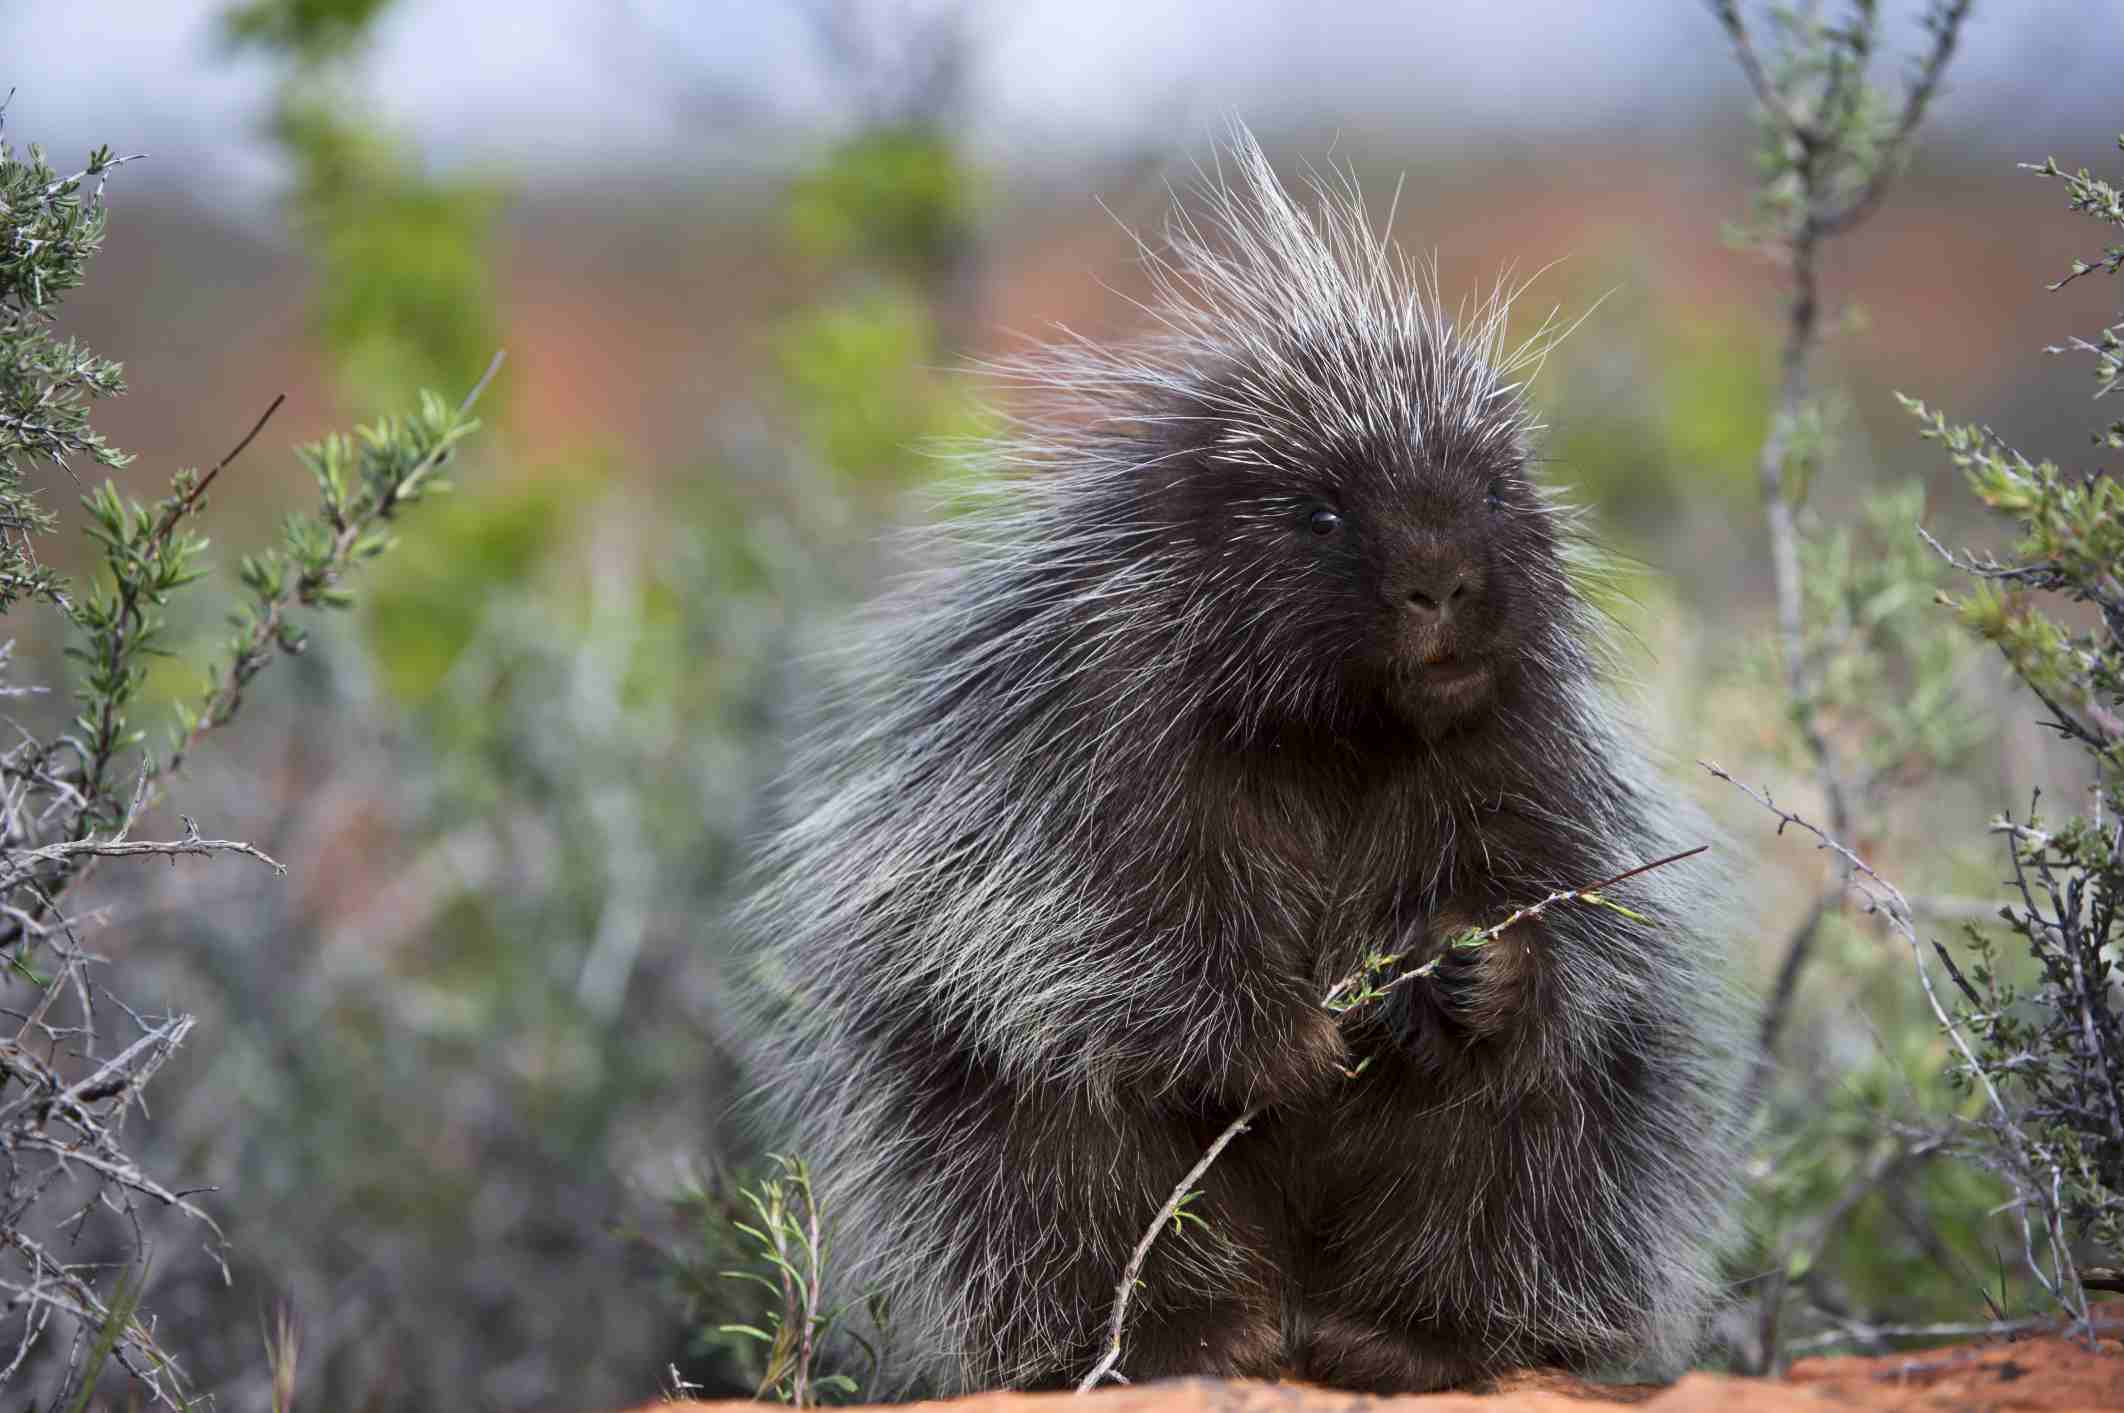 Porcupine sitting holding a twig